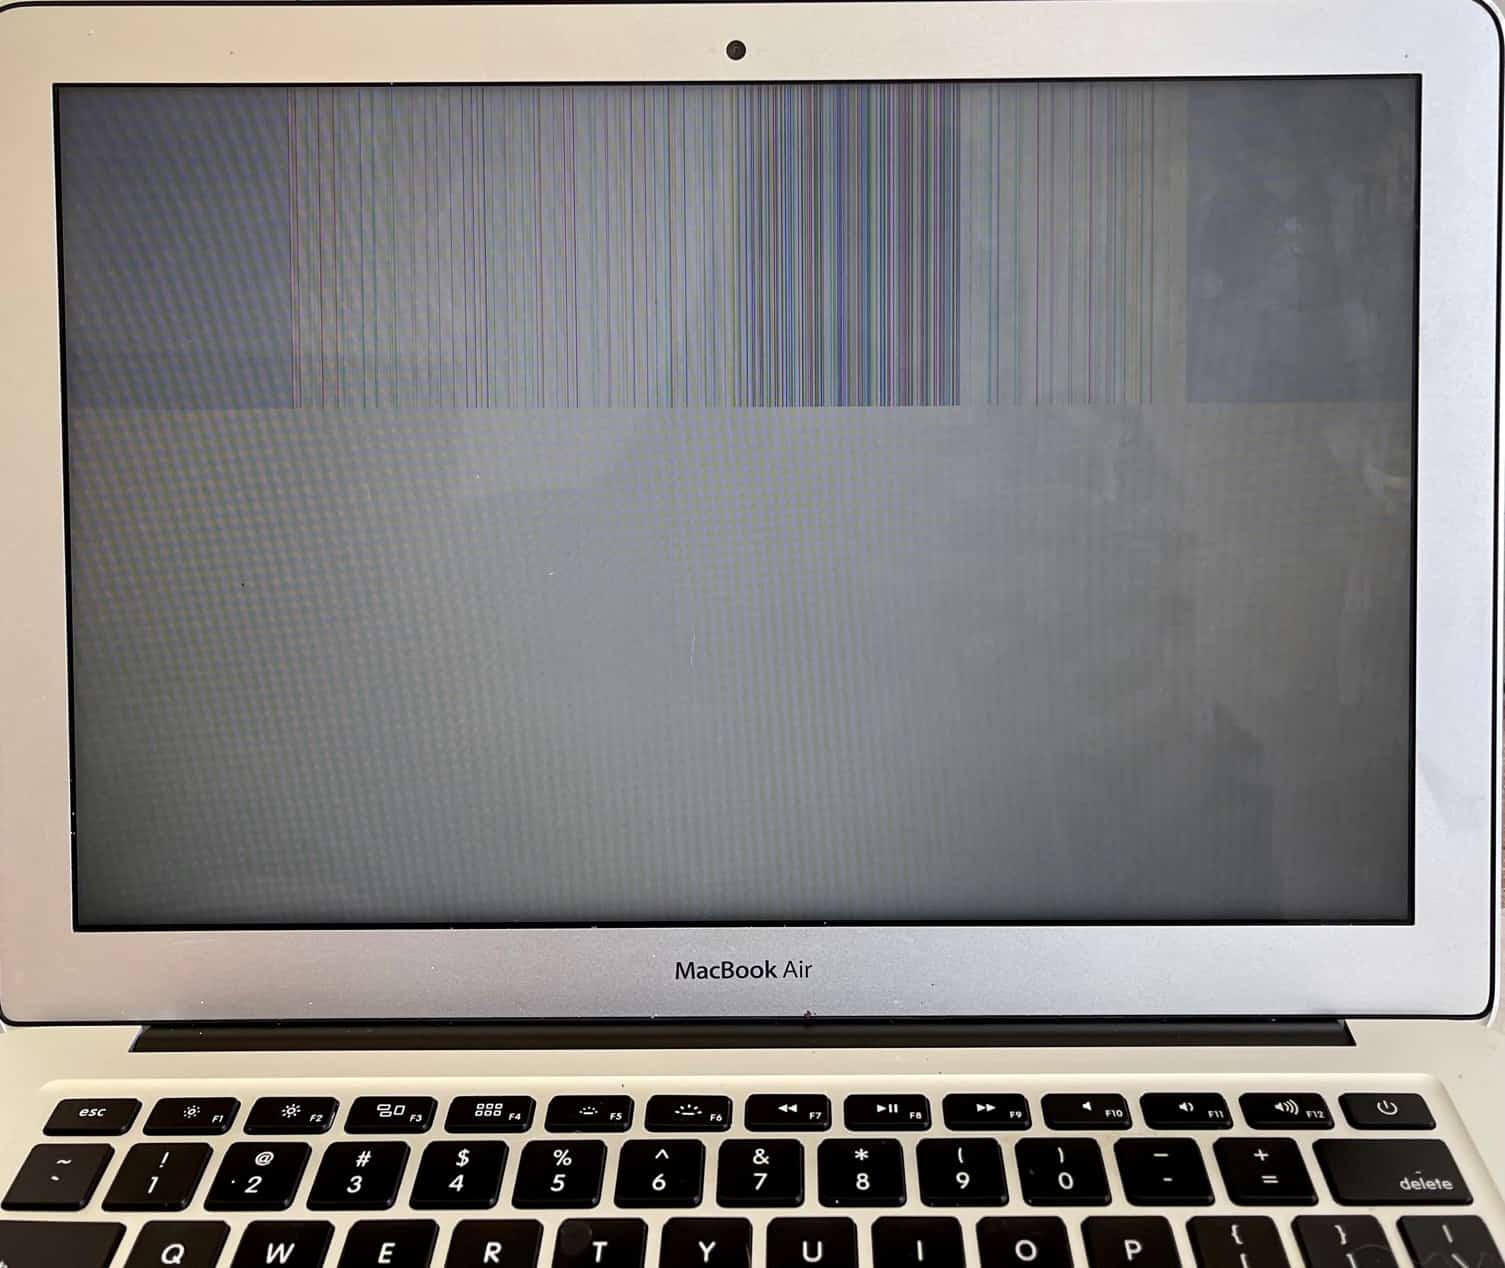 MacBook Air Screen Repair Service - Nationwide Mail-in Service Available